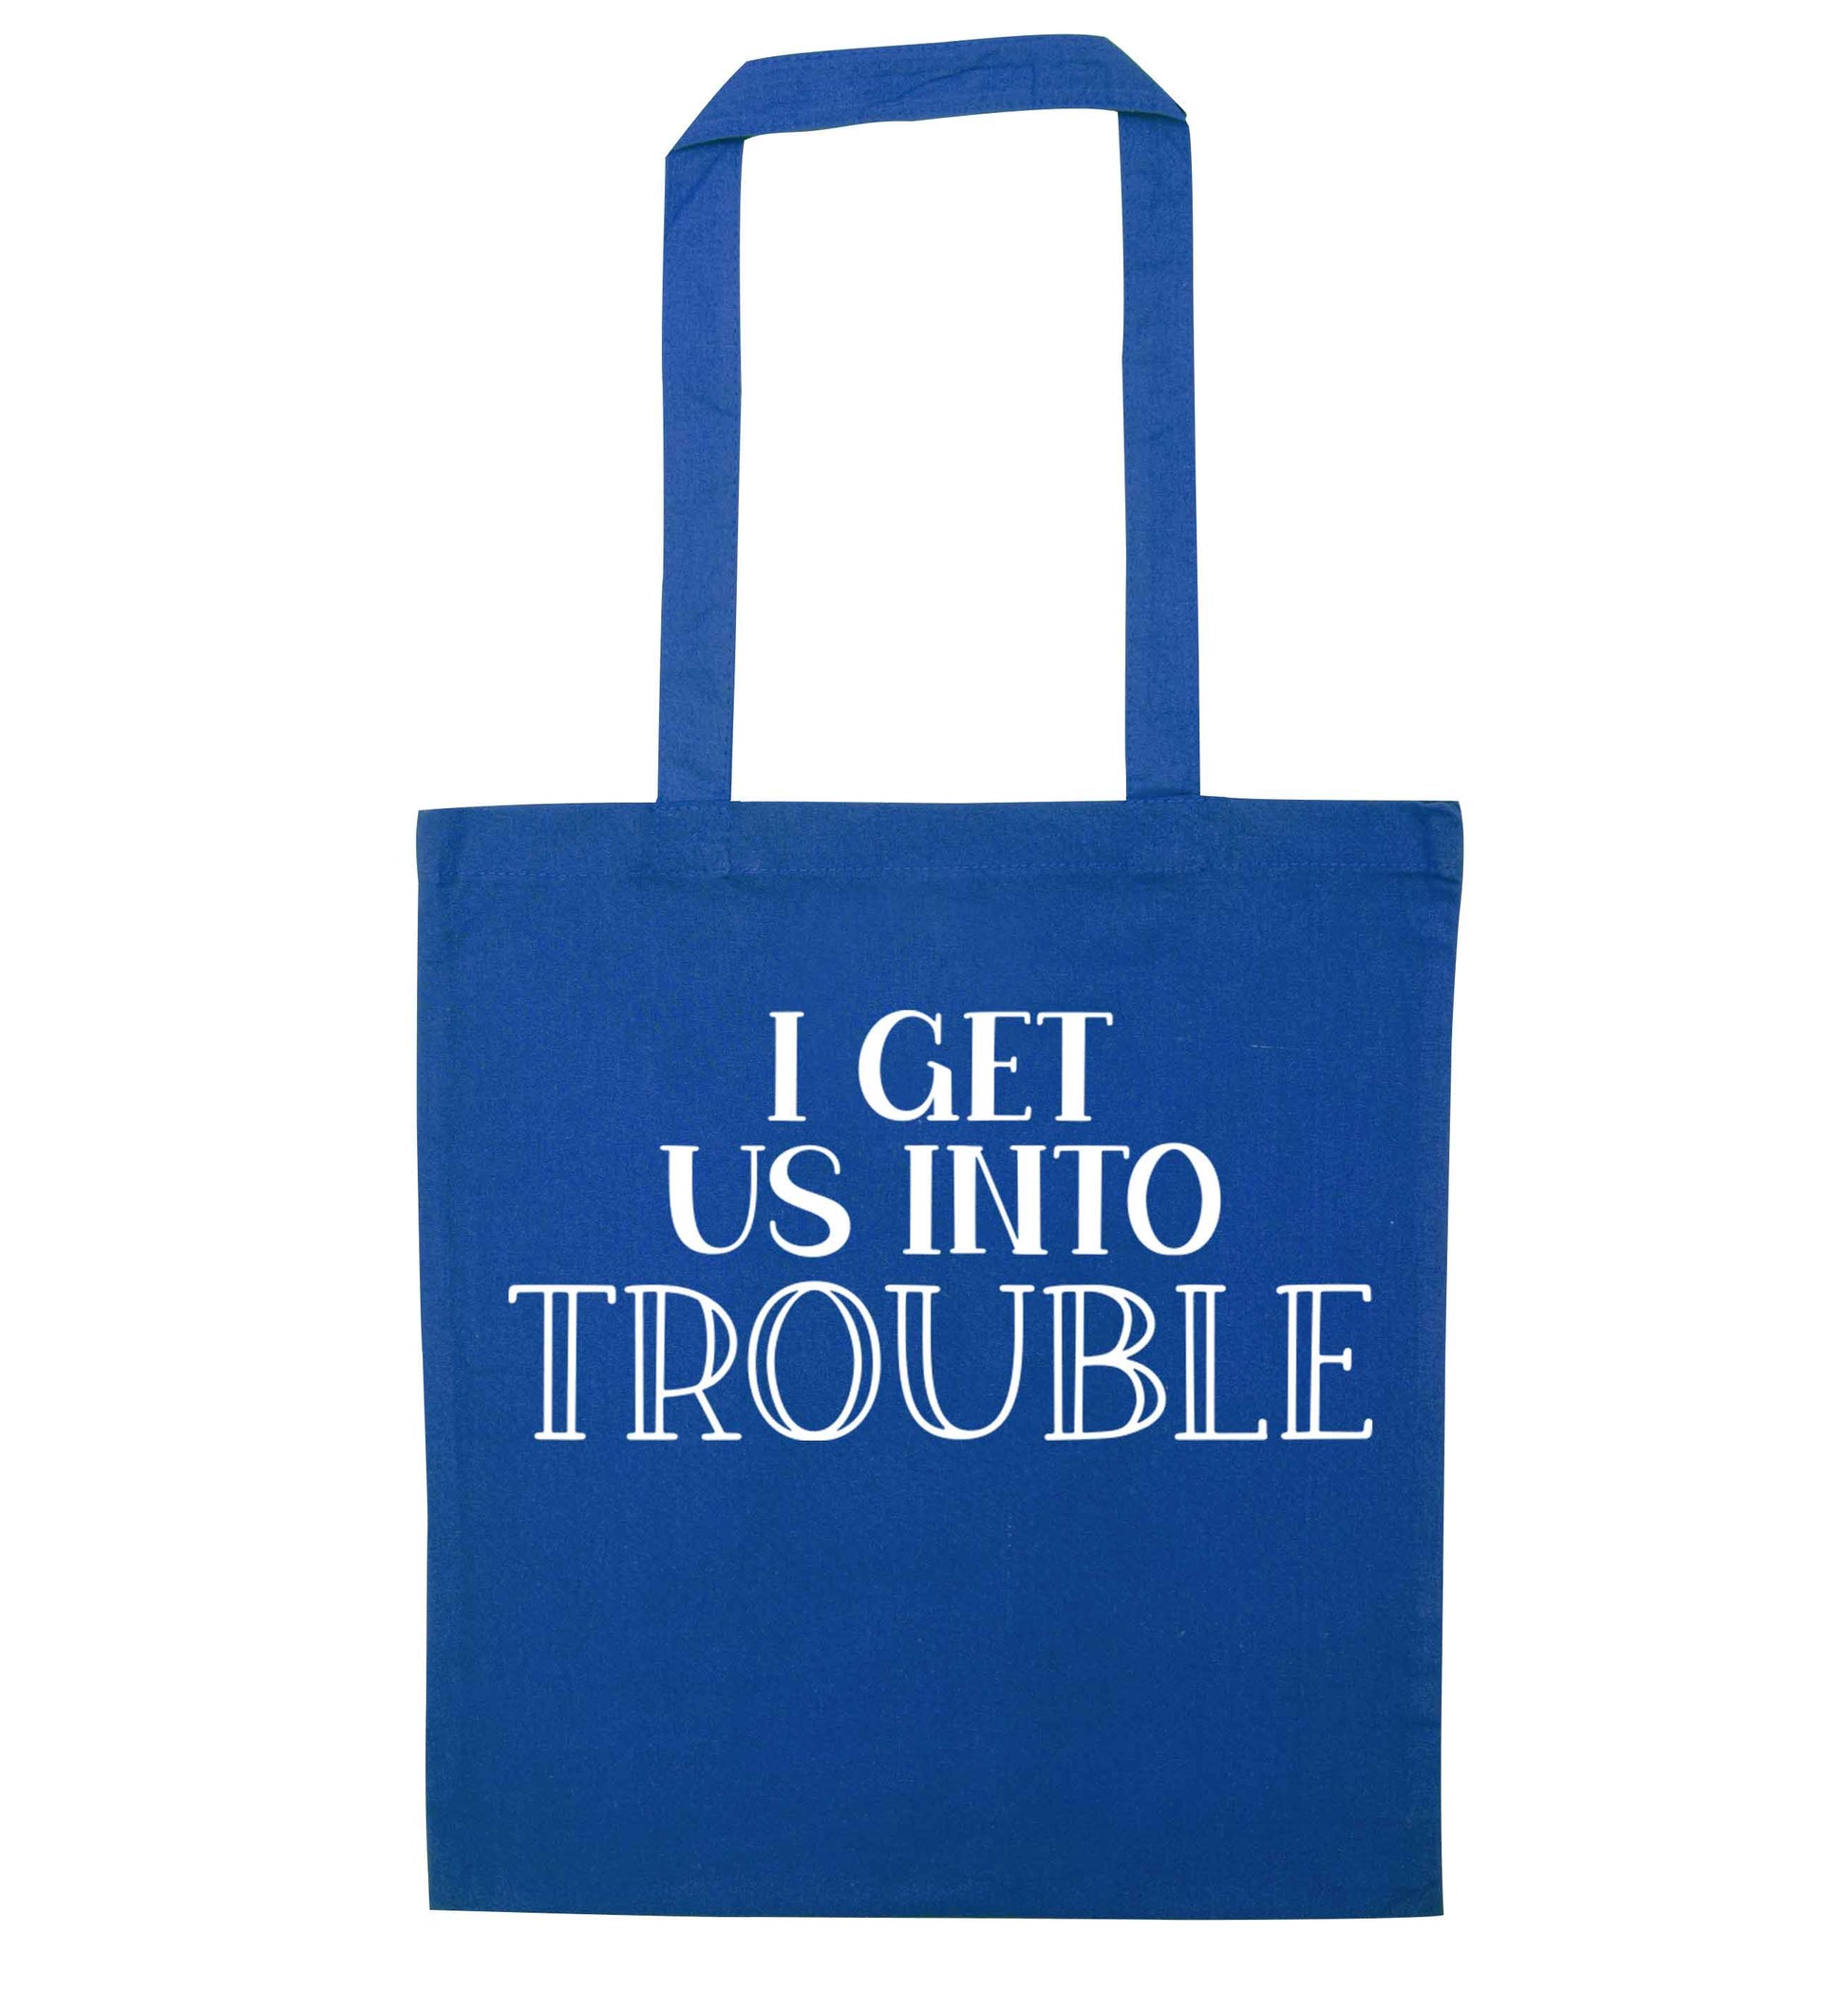 I get us into trouble blue tote bag